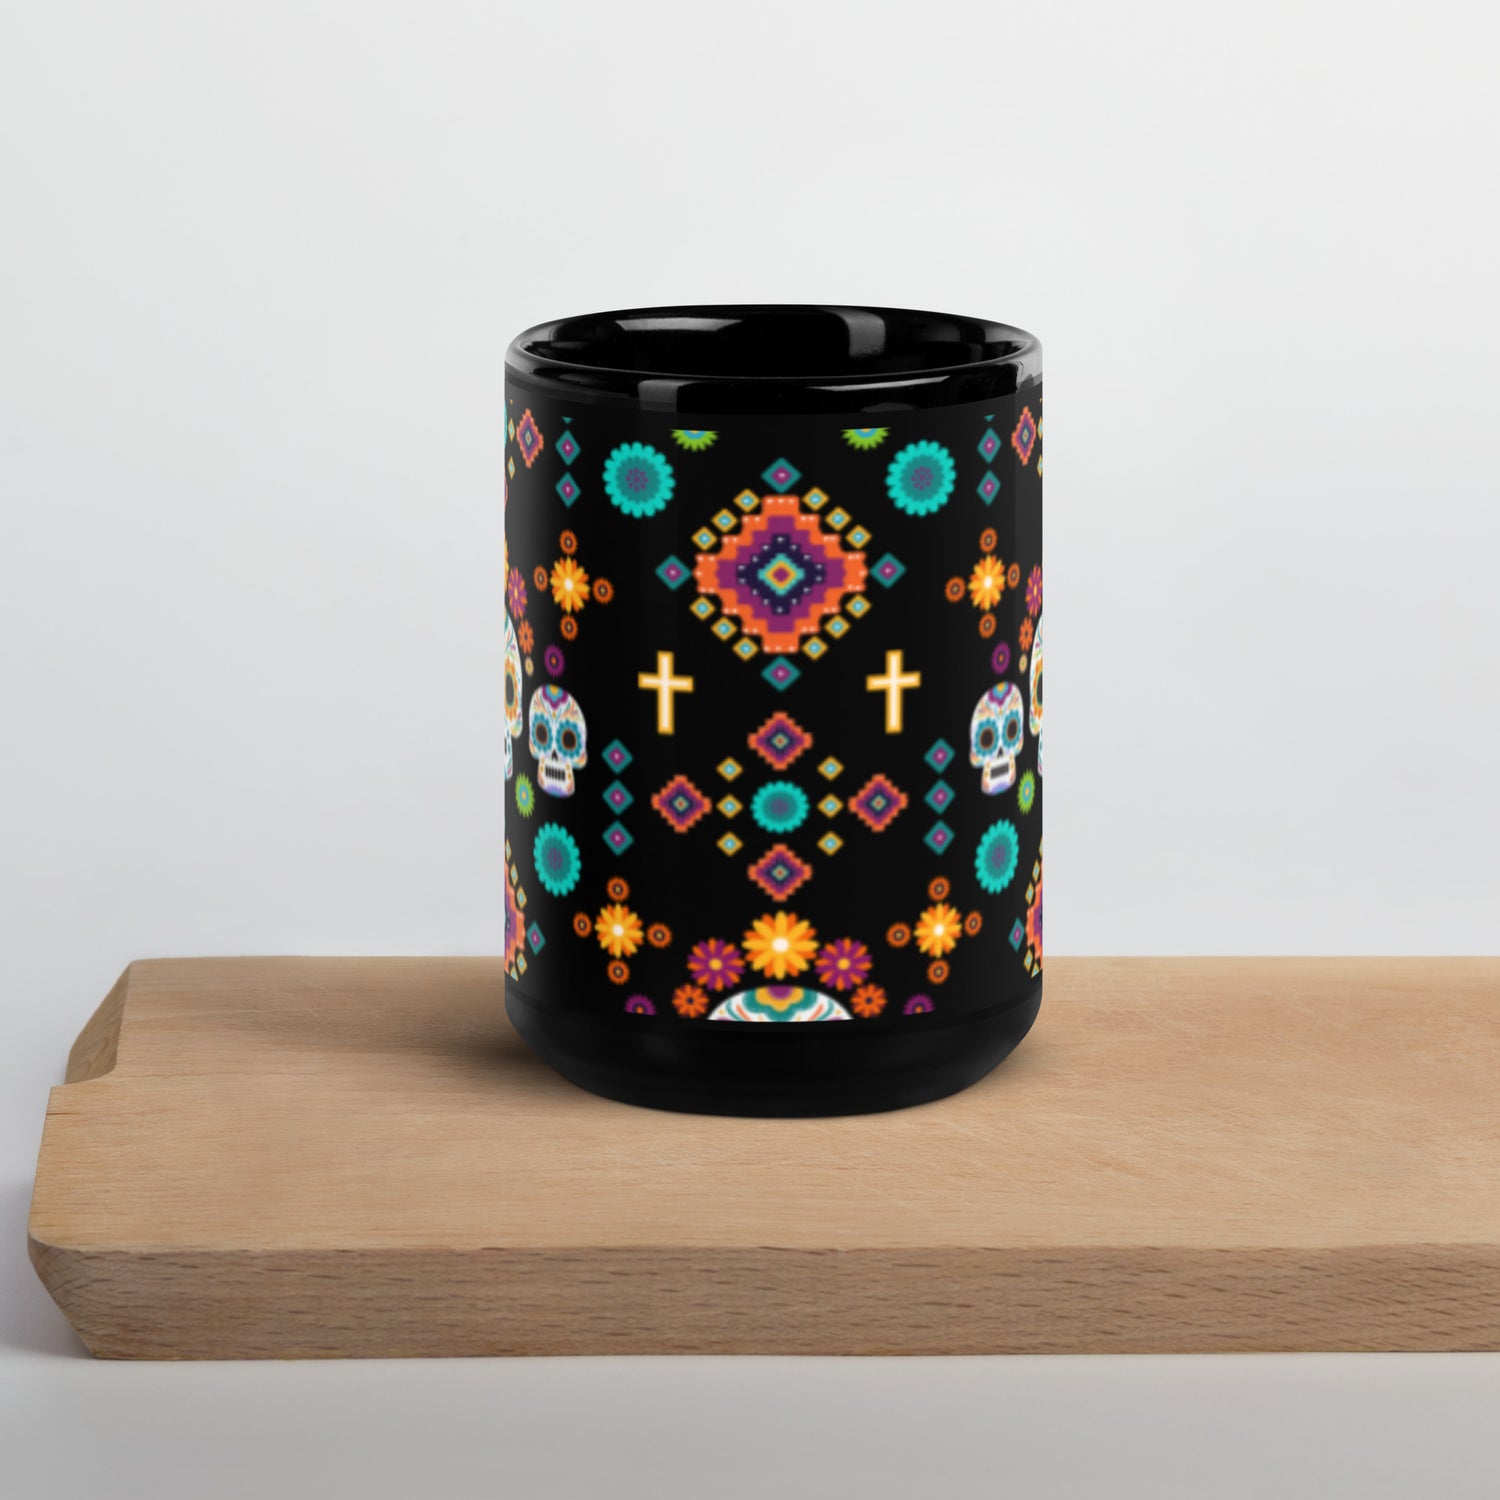 Mexican Day of the Dead Black Mug